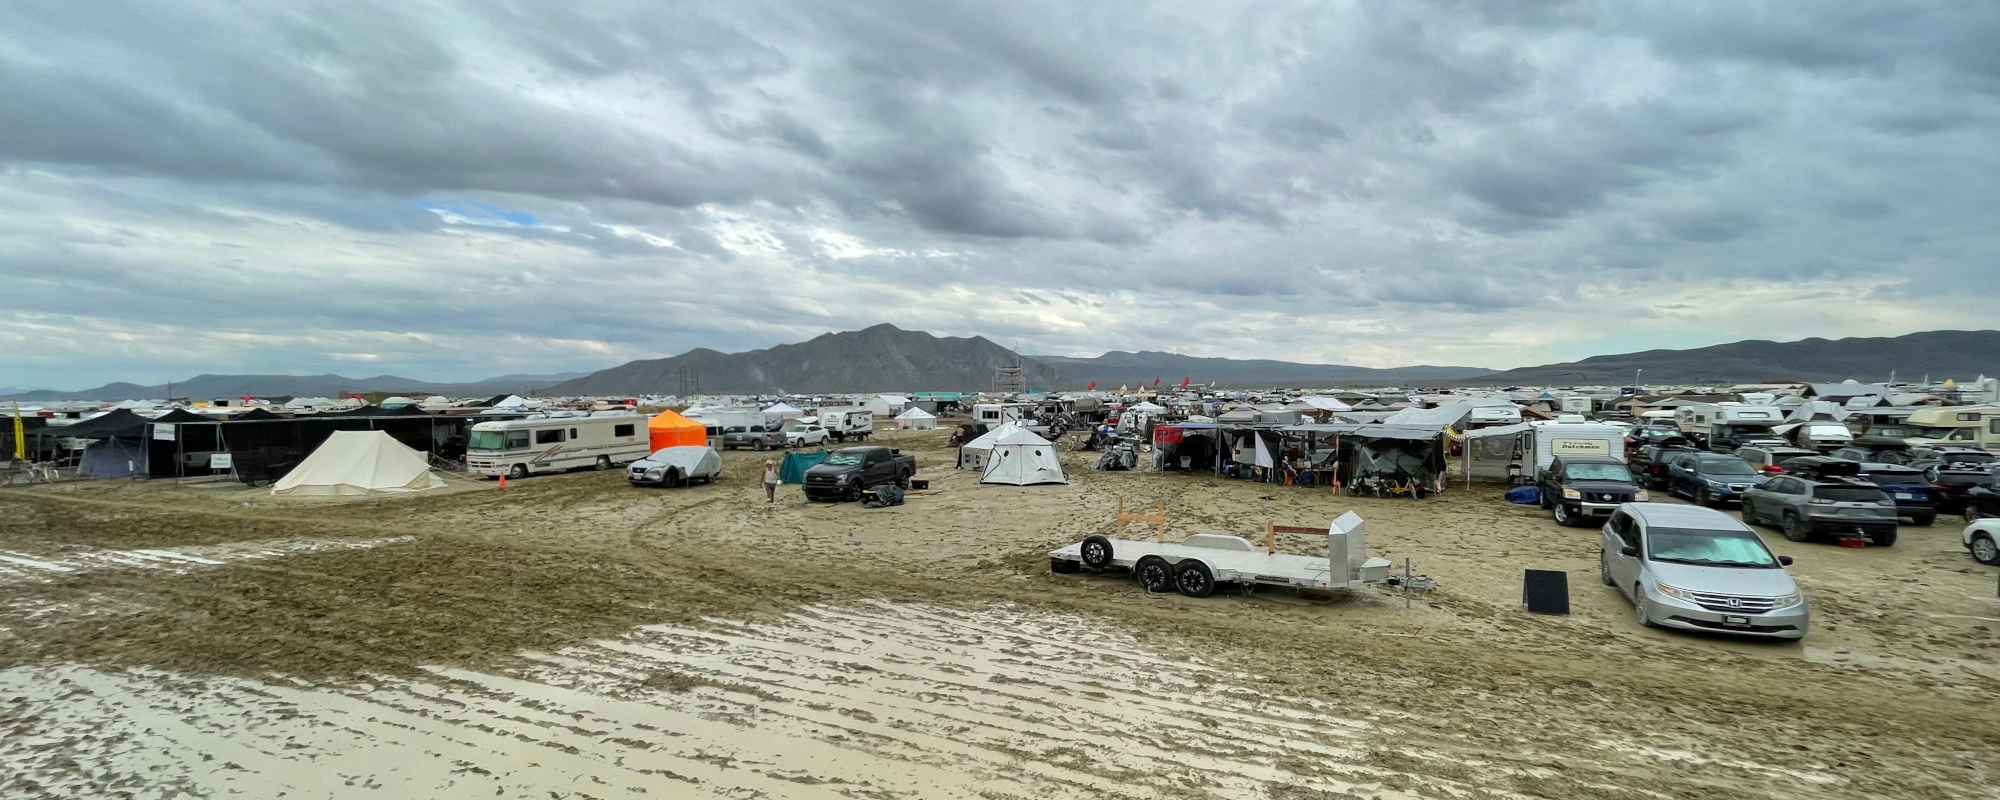 Roads Reportedly Reopen for 70,000-Plus Burning Man Attendees Stuck in Sludge After Flooding